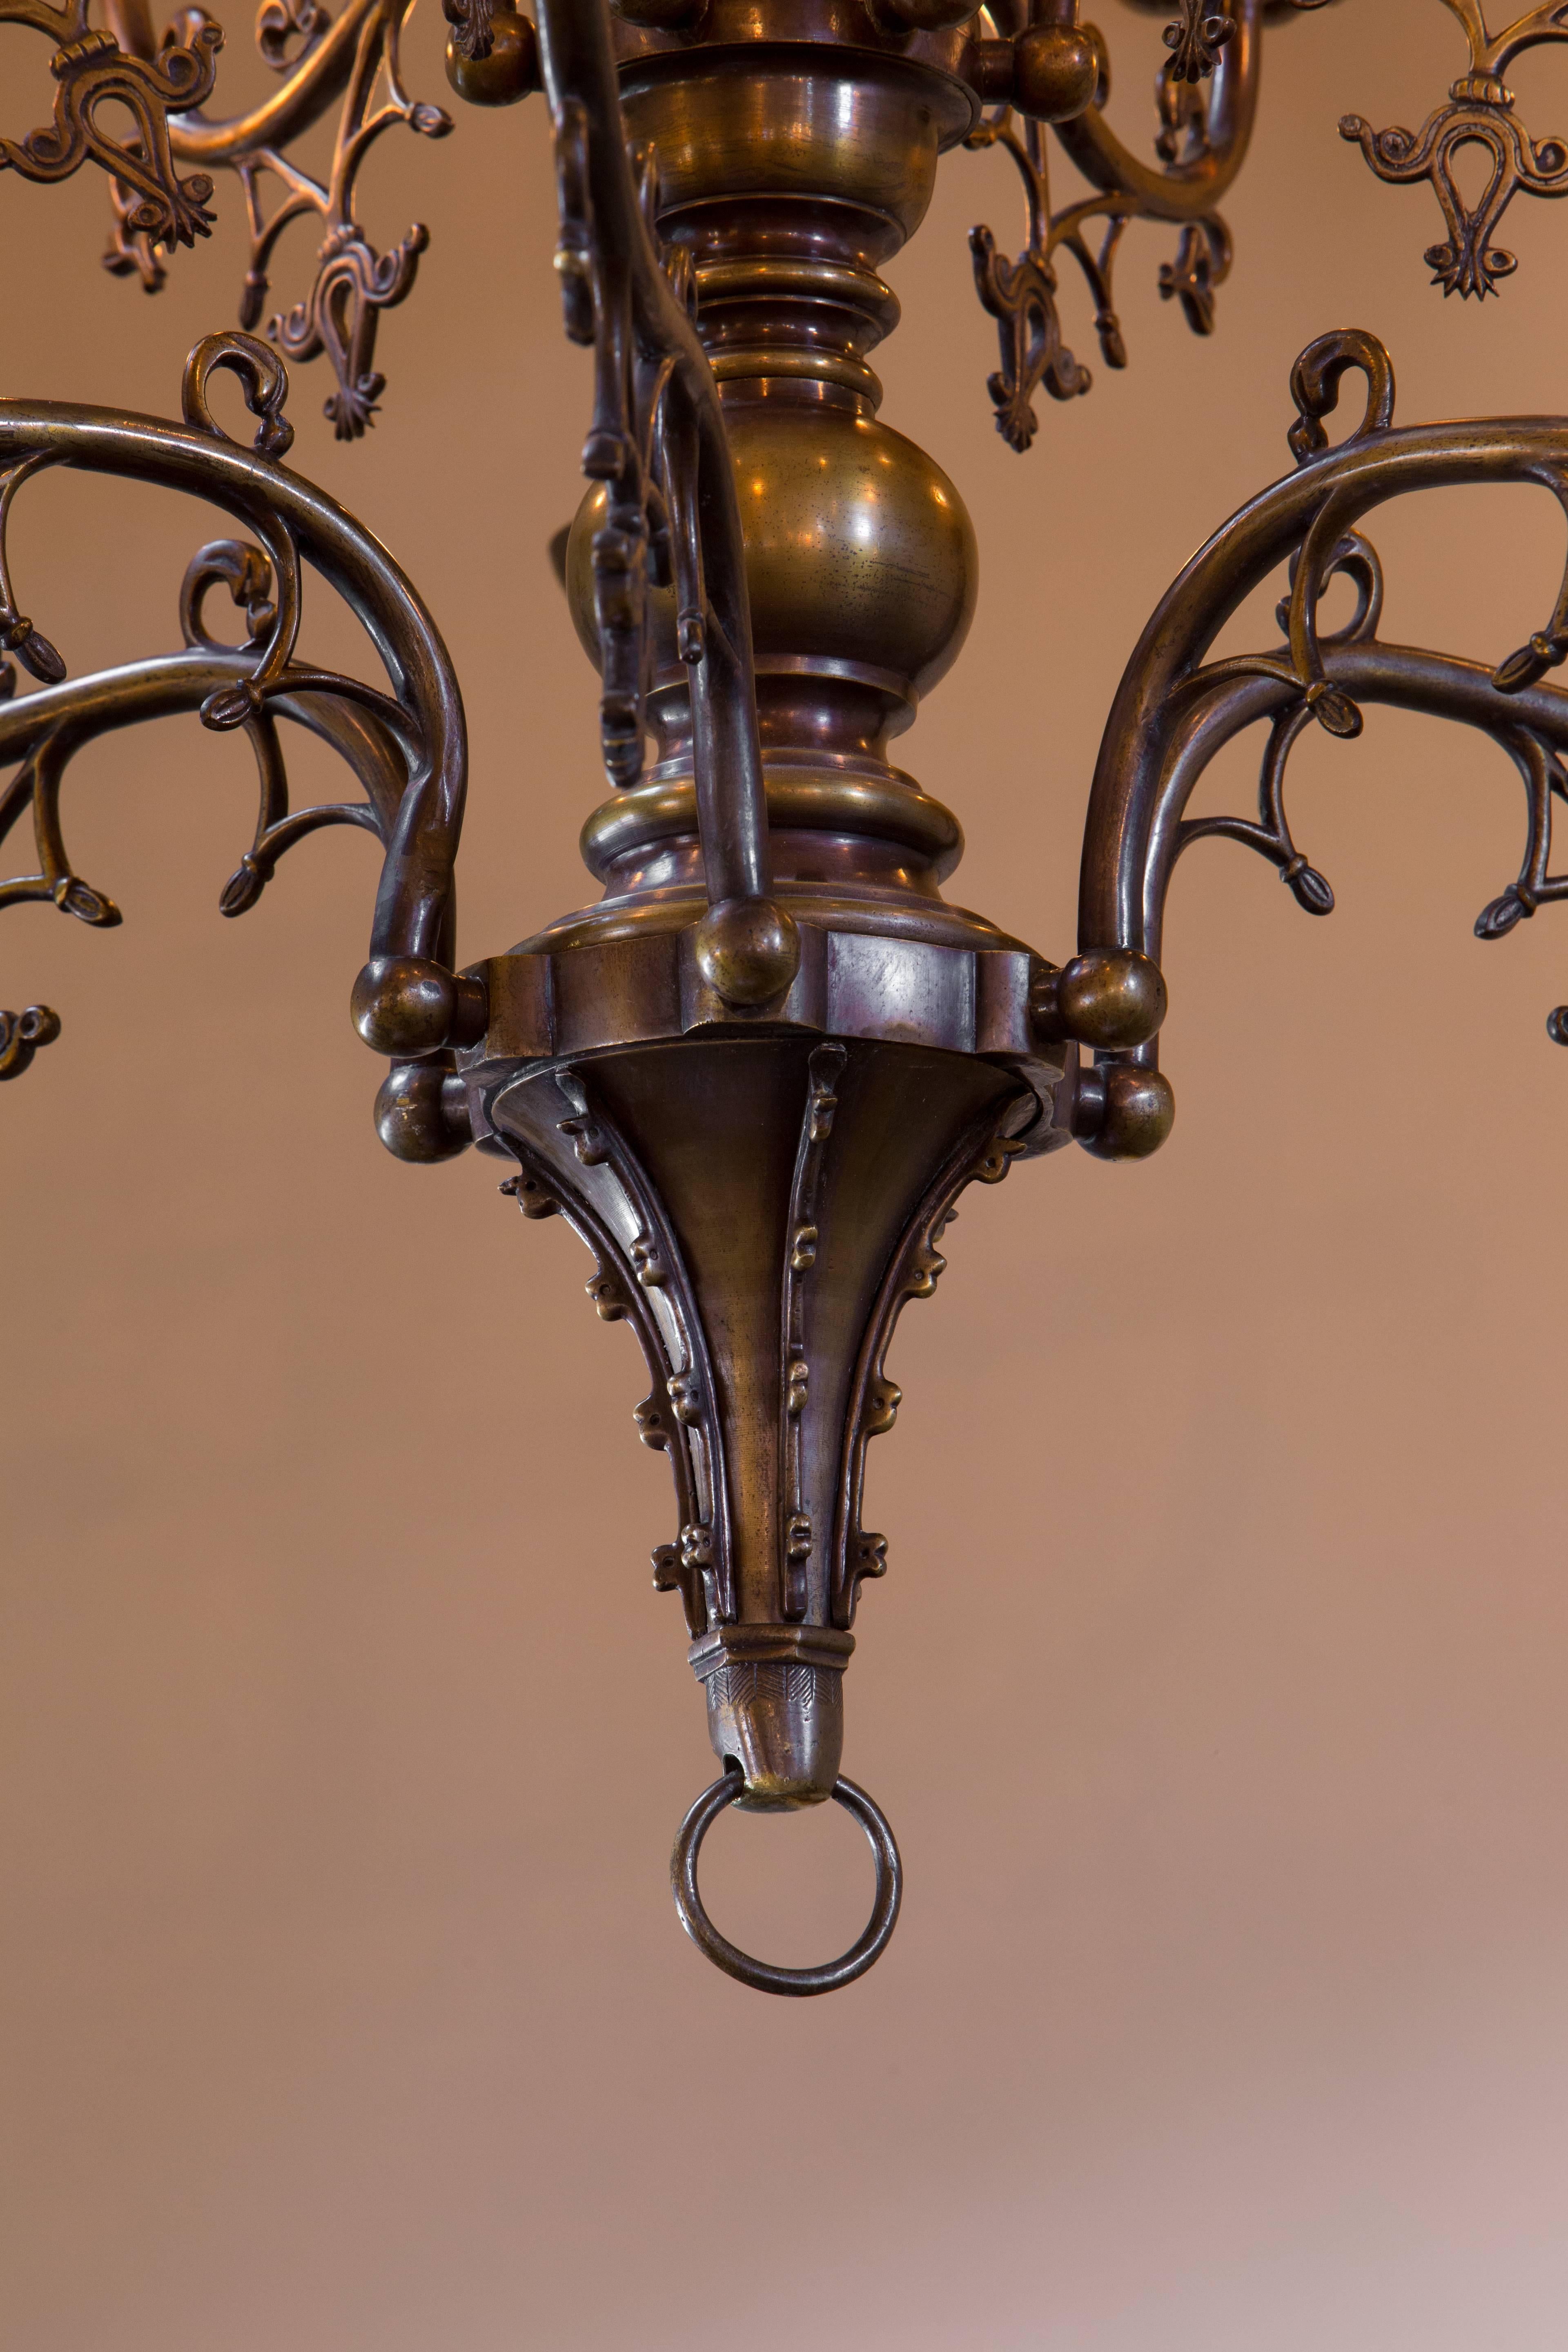 Antique bronze Gothic Revival chandelier from Belgium, circa 1900.
Gorgeous casting, patina and detailing.
Newly rewired in the USA with all UL listed parts and 12 candelabra sockets. Comes with matching chain and canopy.
 